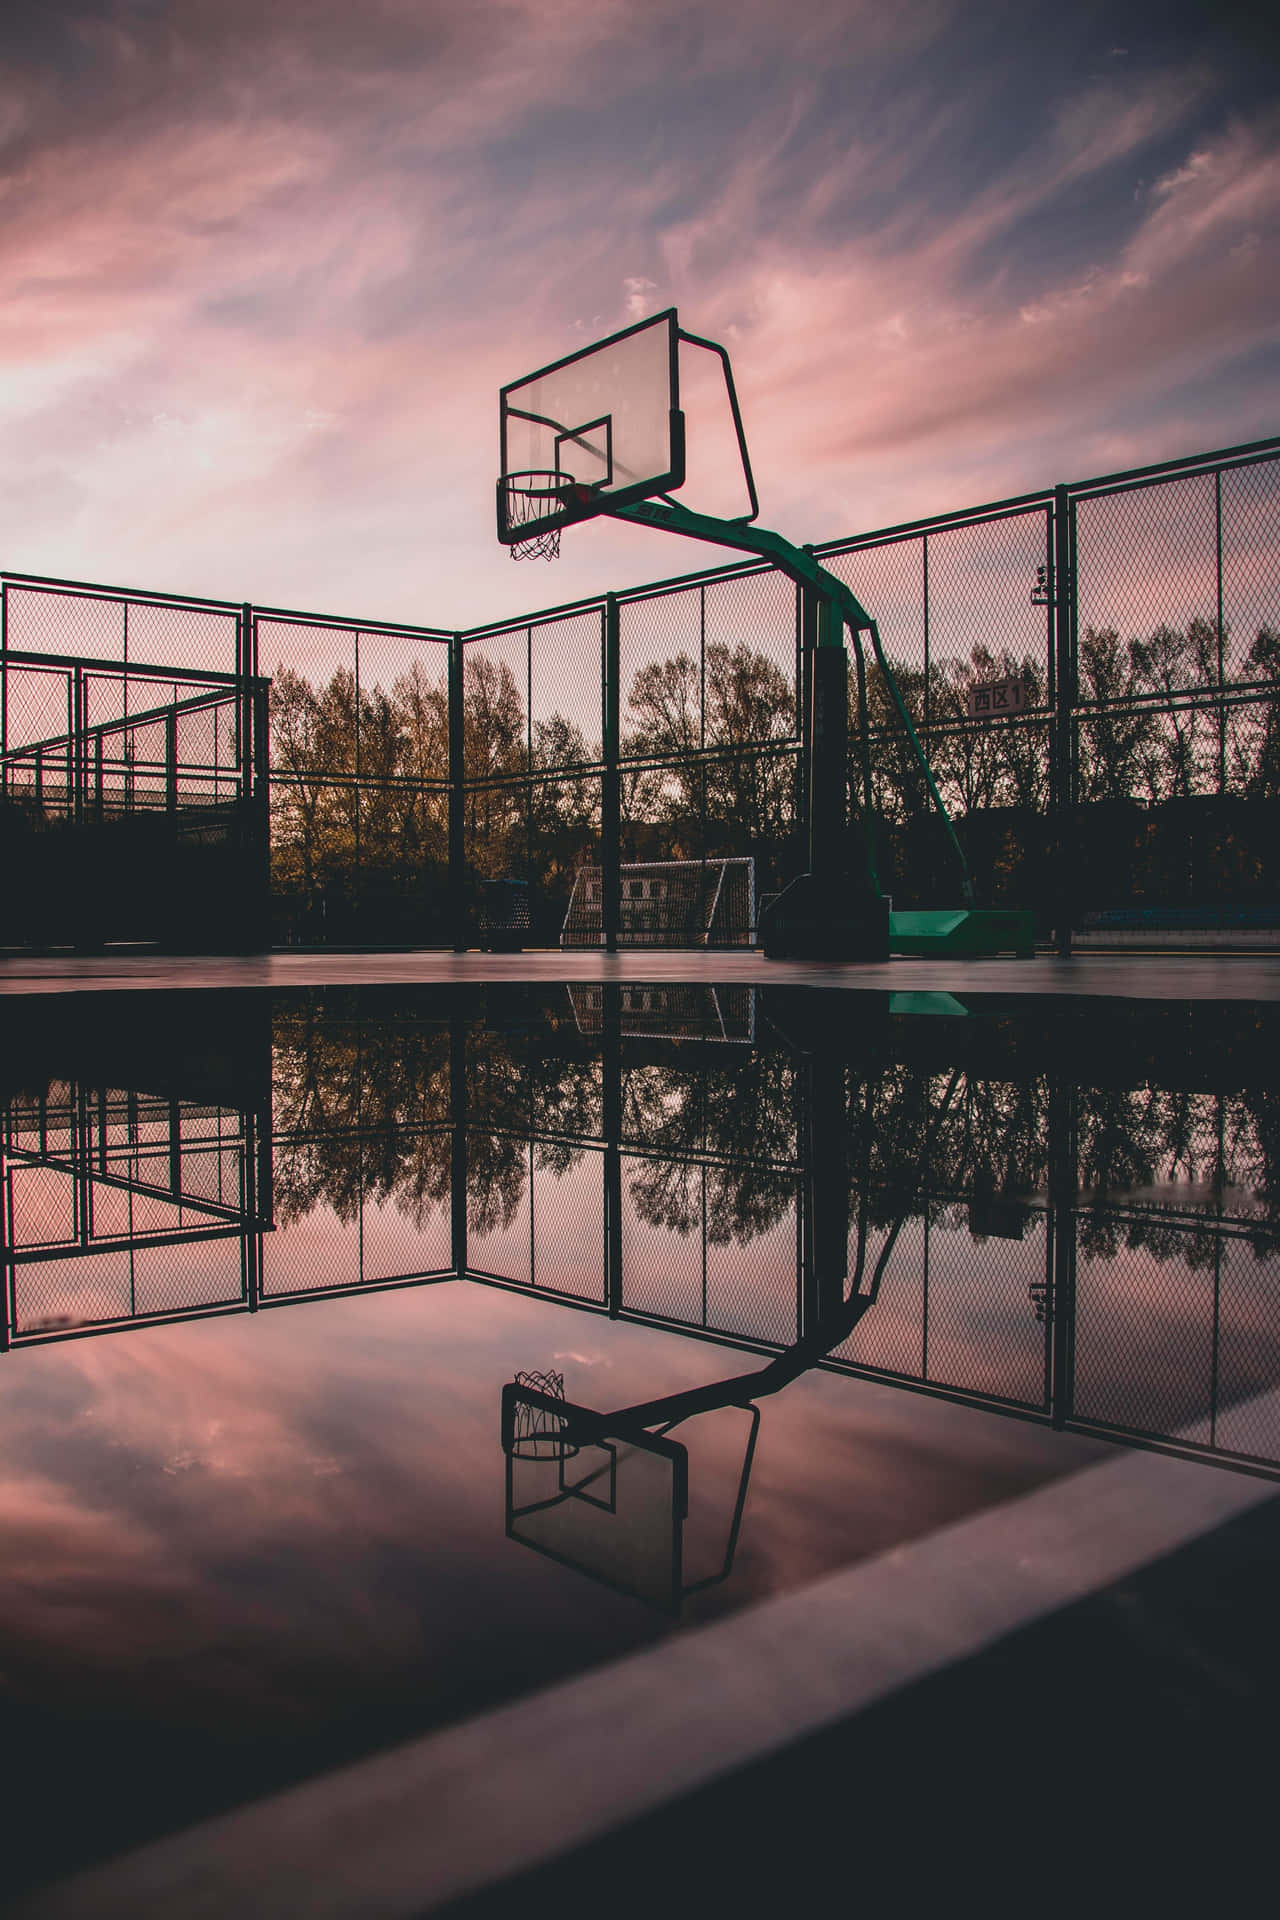 A Basketball Hoop Reflected In A Pool